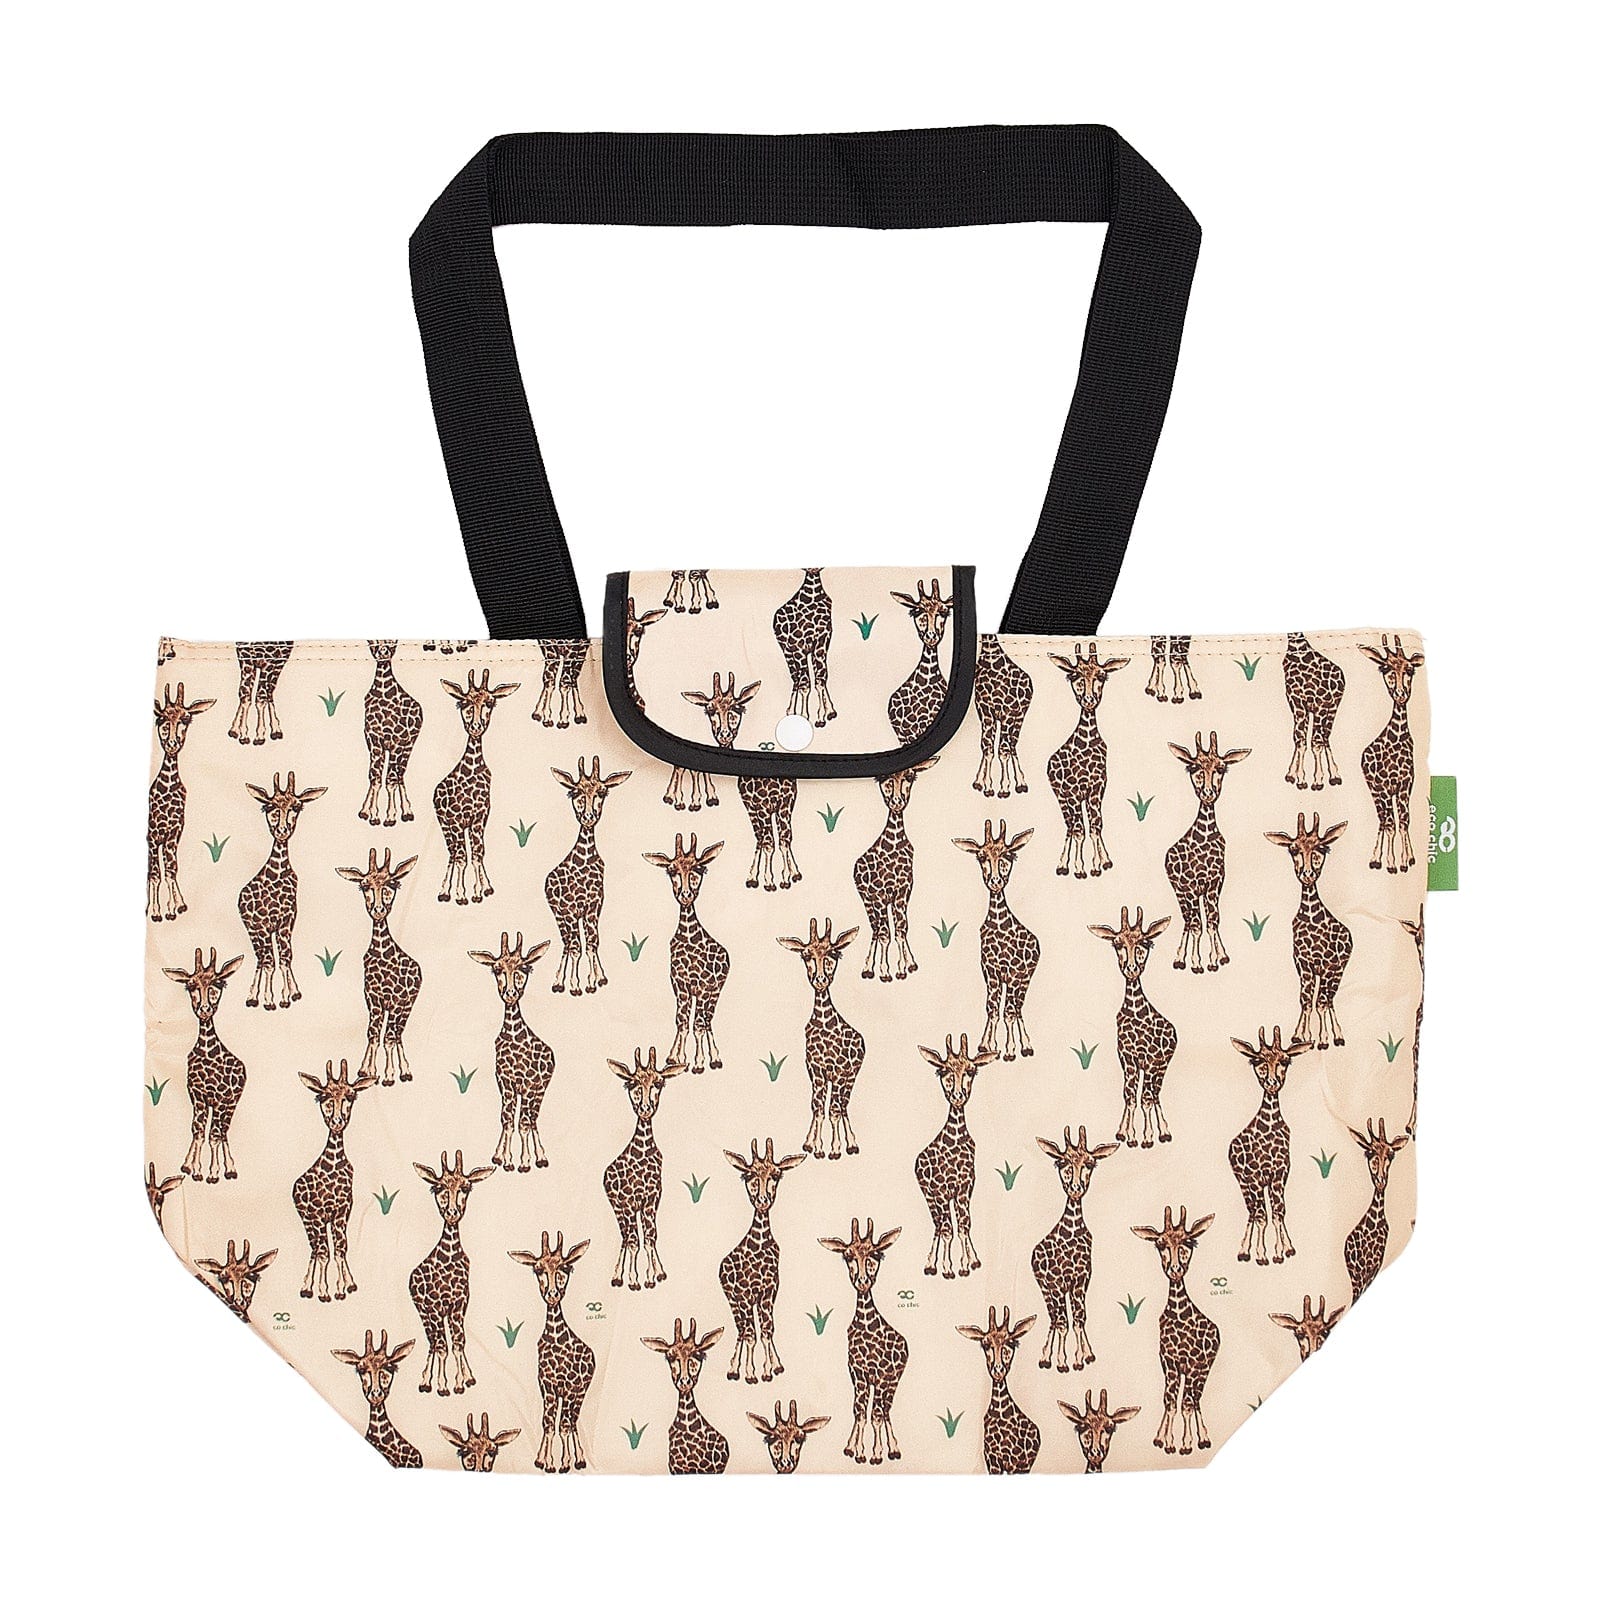 Eco Chic Beige Eco Chic Lightweight Foldable Insulated Shopping Bag Giraffes